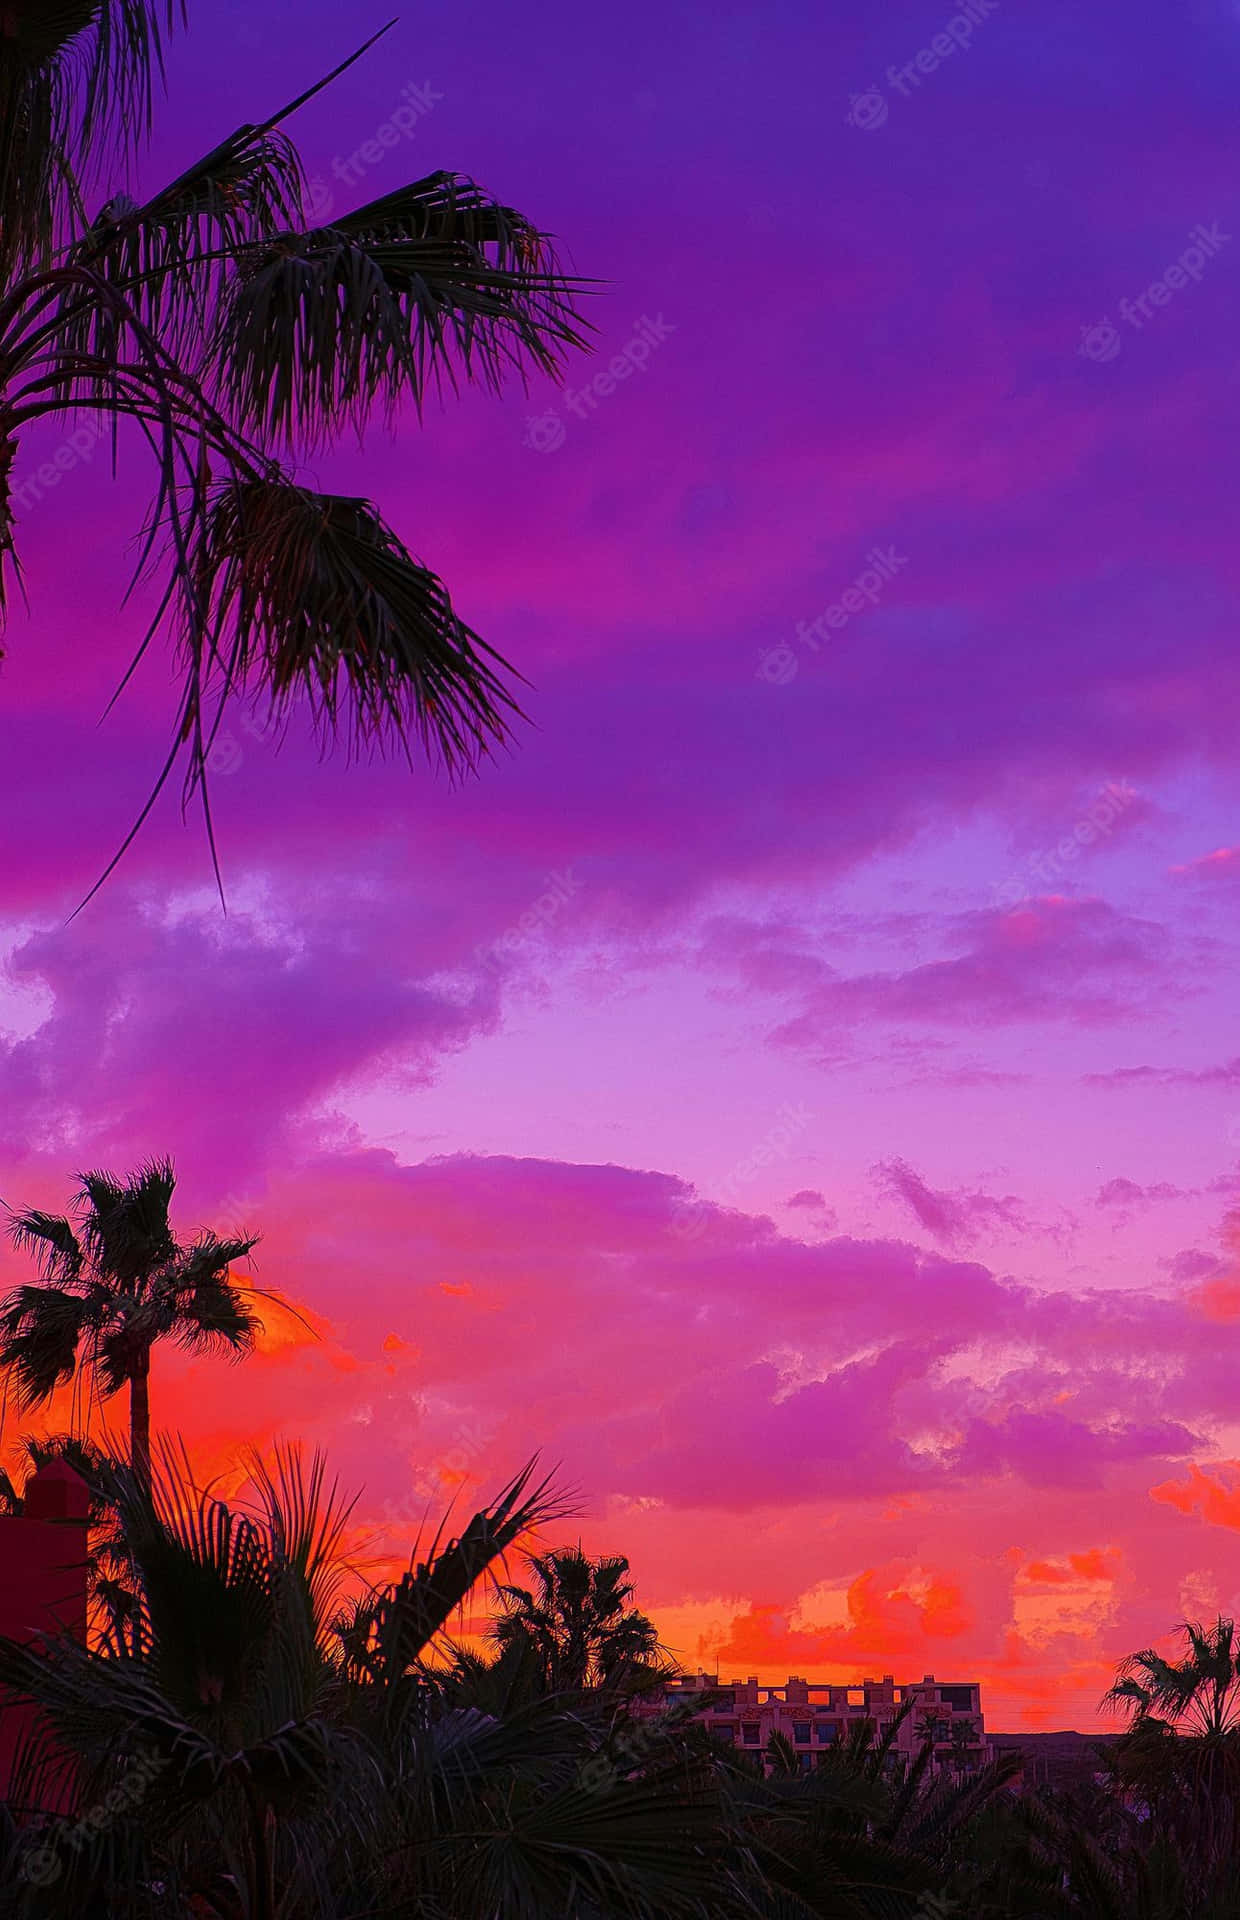 Tropical Sunset Purple And Orange Skies Palm Trees Wallpaper